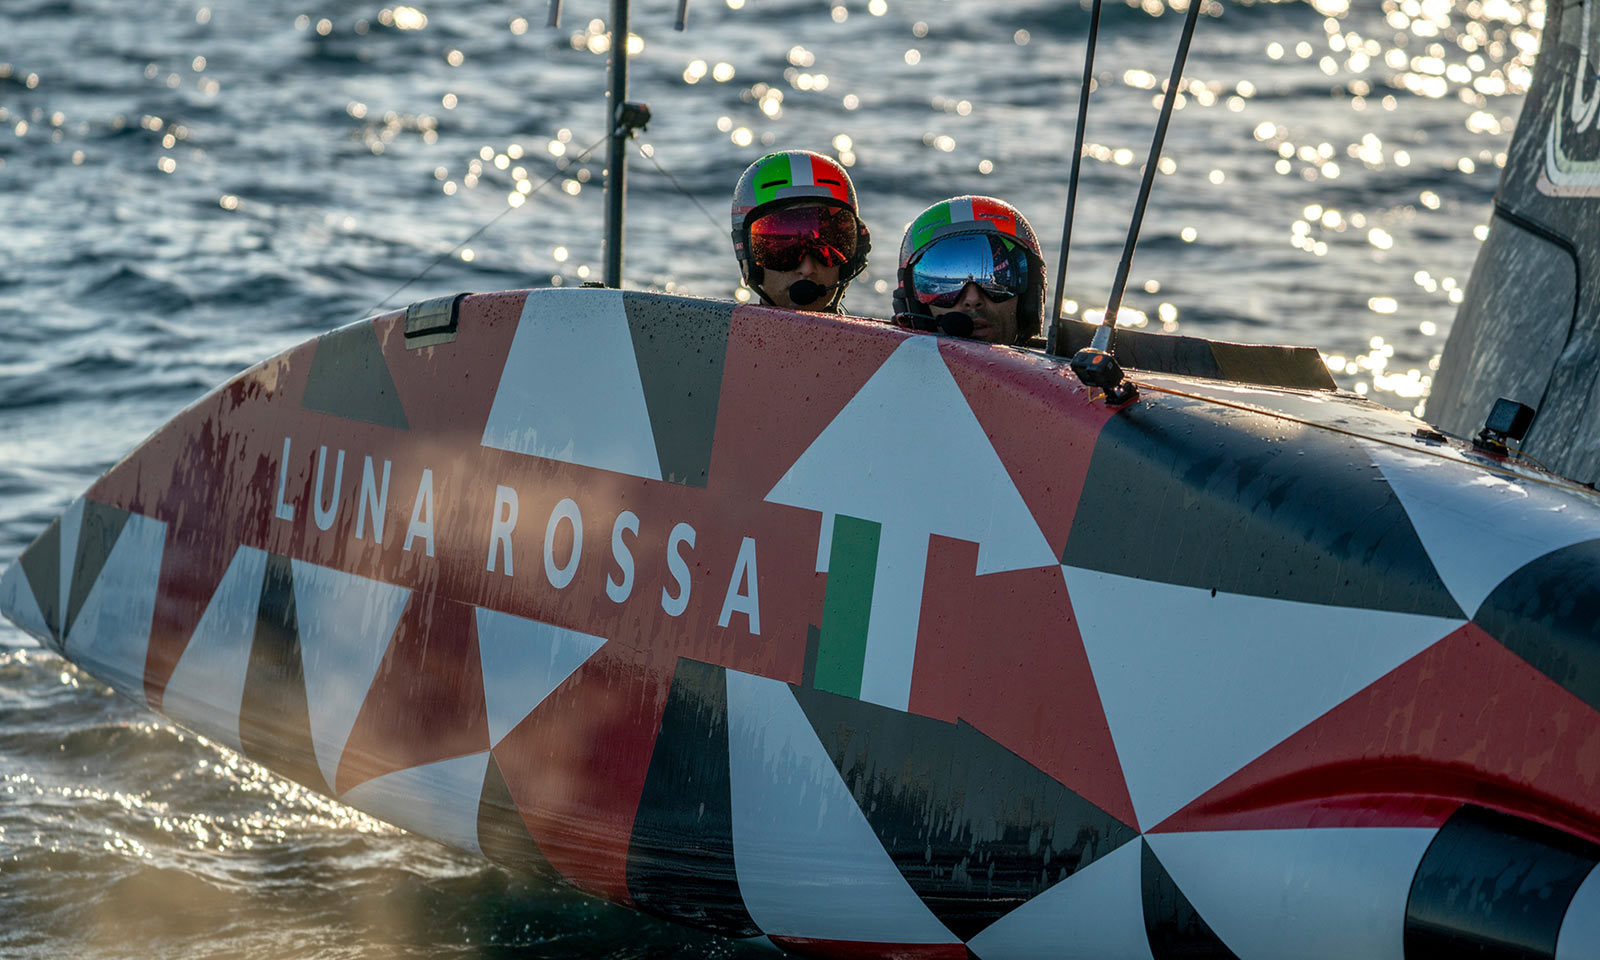 Campagnolo yachting cyclor groupset for America's Cup with Luna Rossa Prada Pirelli sailing team, cyclists inside a boat